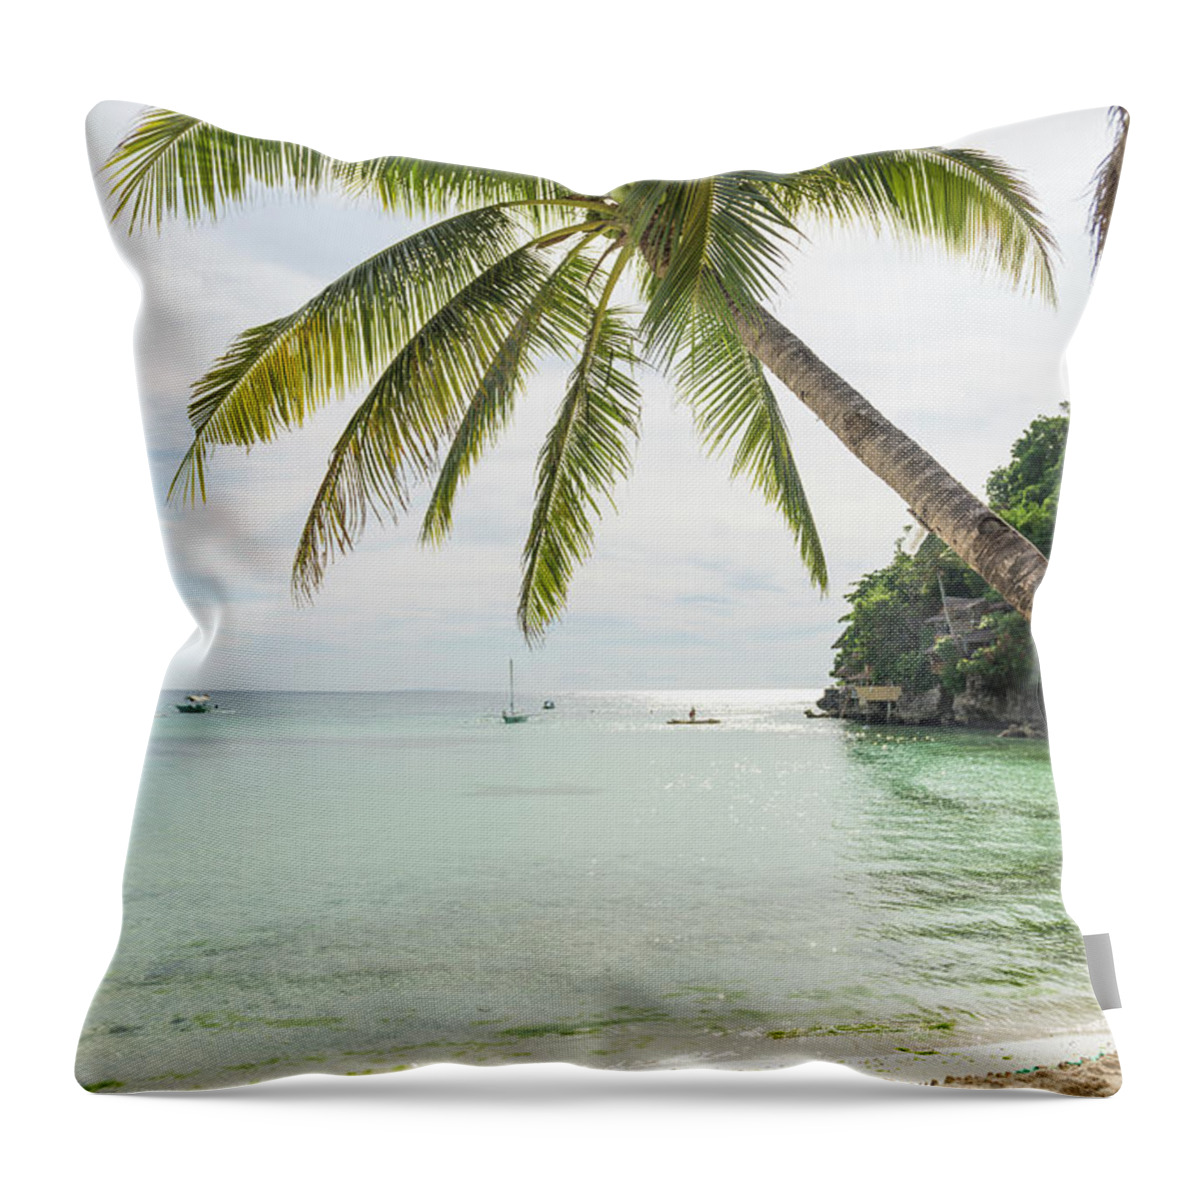 Tranquility Throw Pillow featuring the photograph White Beach, Boracay, Philippines #1 by John Harper